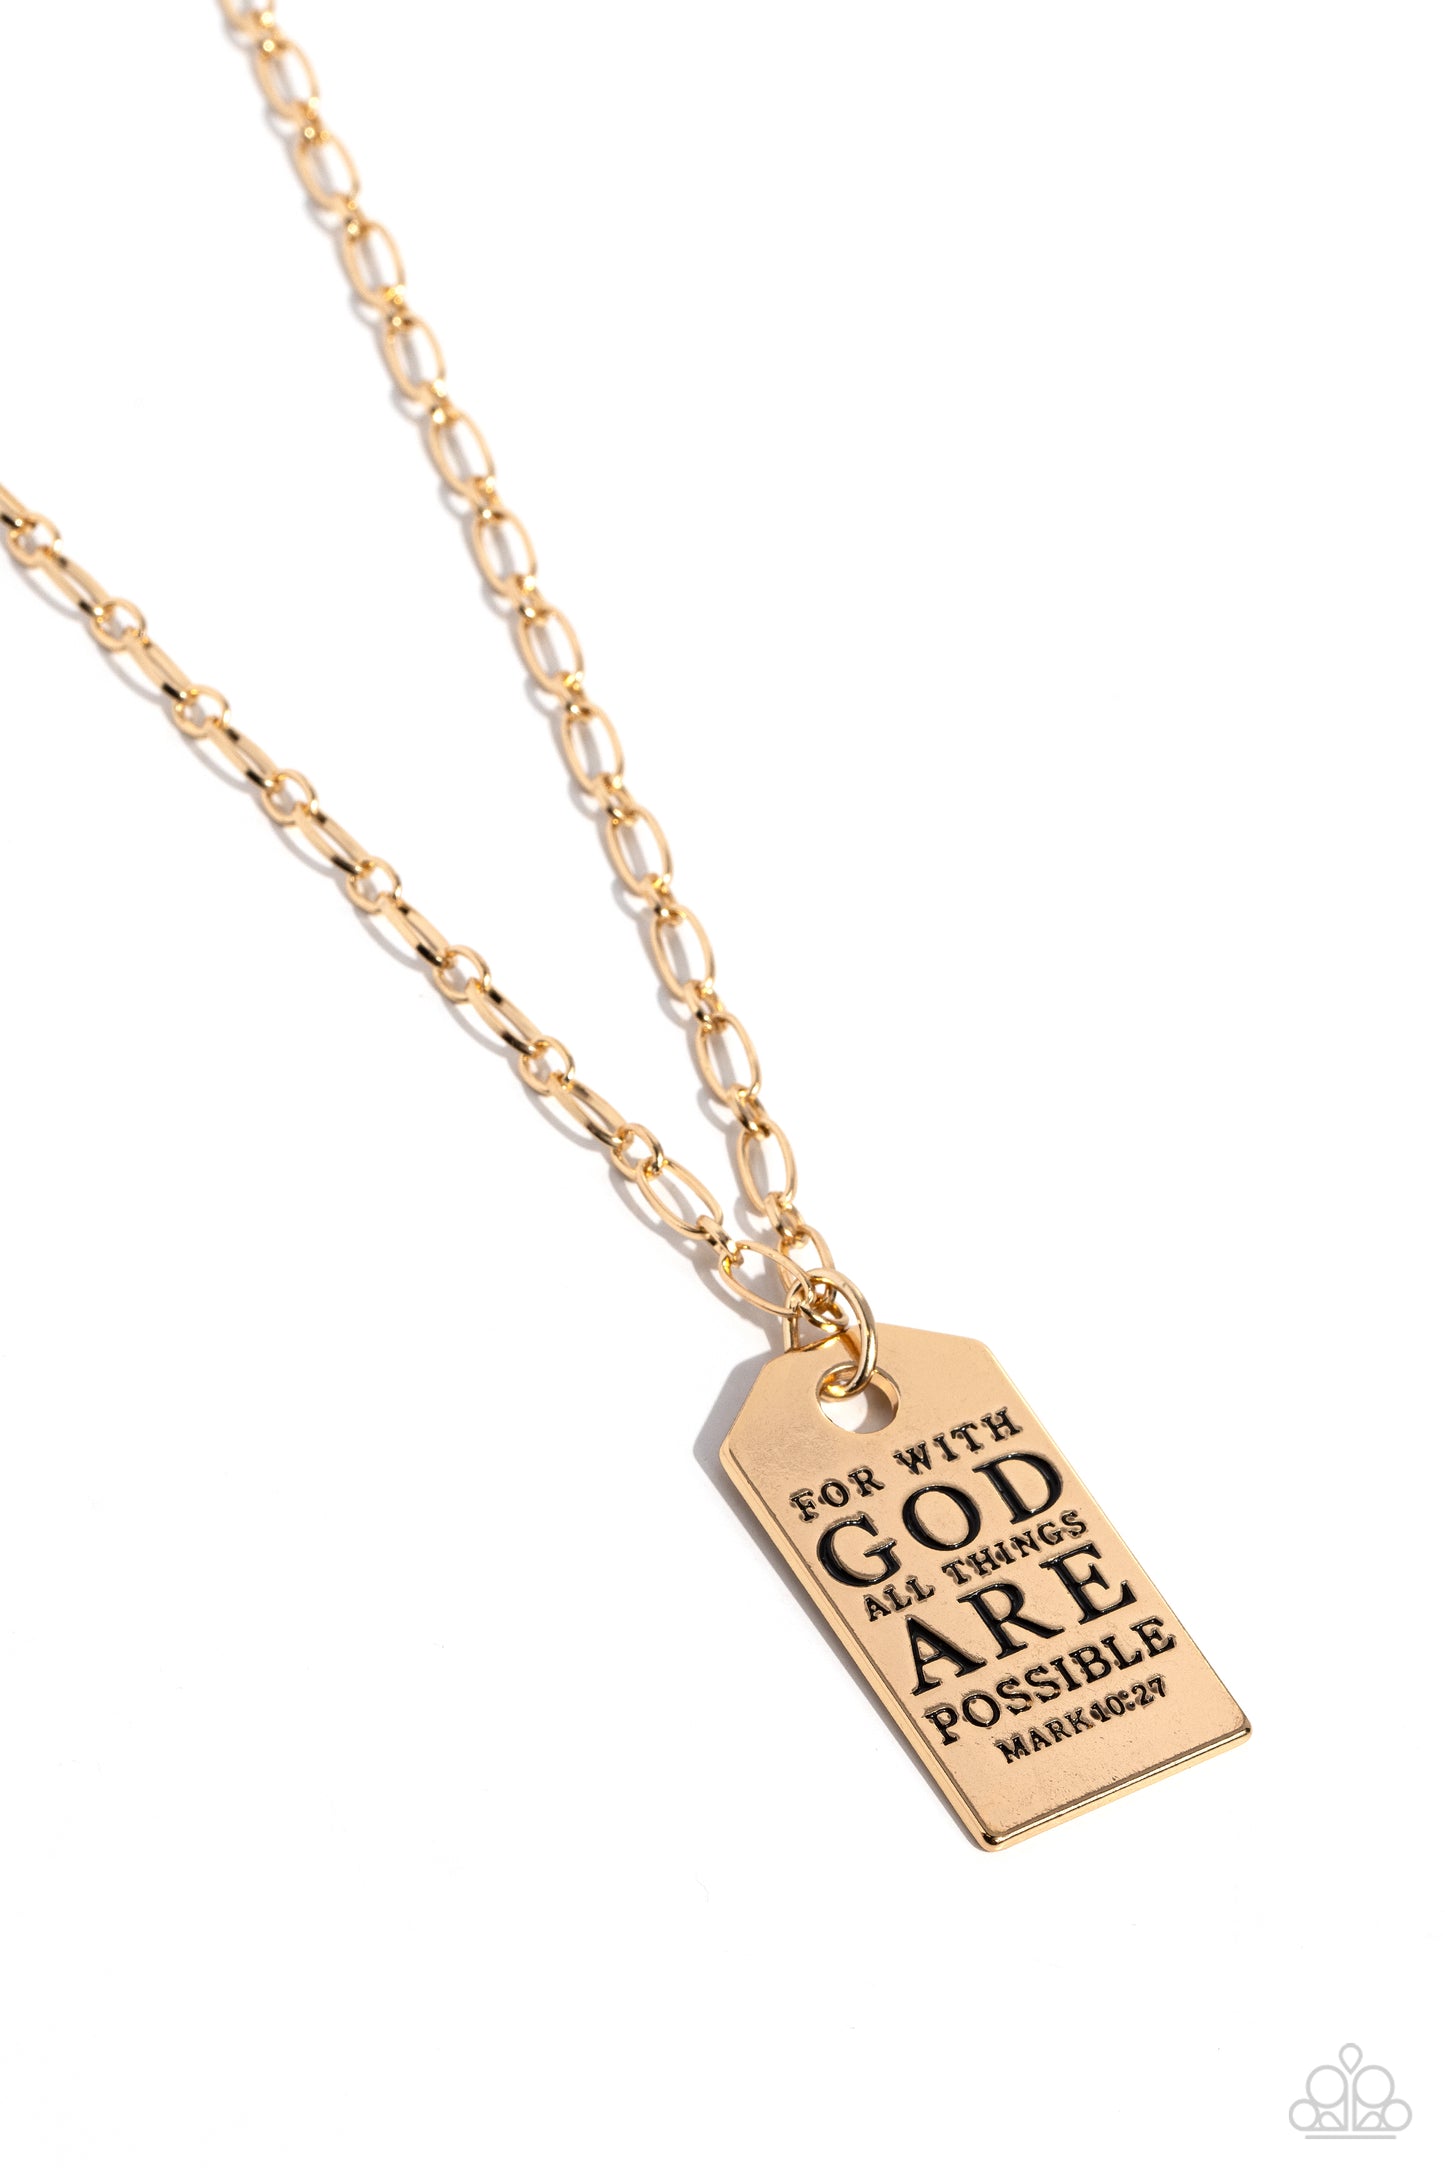 Possible Pendant Gold Inspirational Necklace - Paparazzi Accessories  Dangling from simple golden links, a sleek gold hoop boosts a rounded rectangular plate. Stamped on the high-sheen gold pendant, the inspiring phrase "For with GOD all things ARE possible" is listed with the scripture reference "Mark 10:27" just below it in a more dainty font for a hopeful finish. Features an adjustable clasp closure.  Sold as one individual necklace. Includes one pair of matching earrings.  P2WD-GDXX-306XX